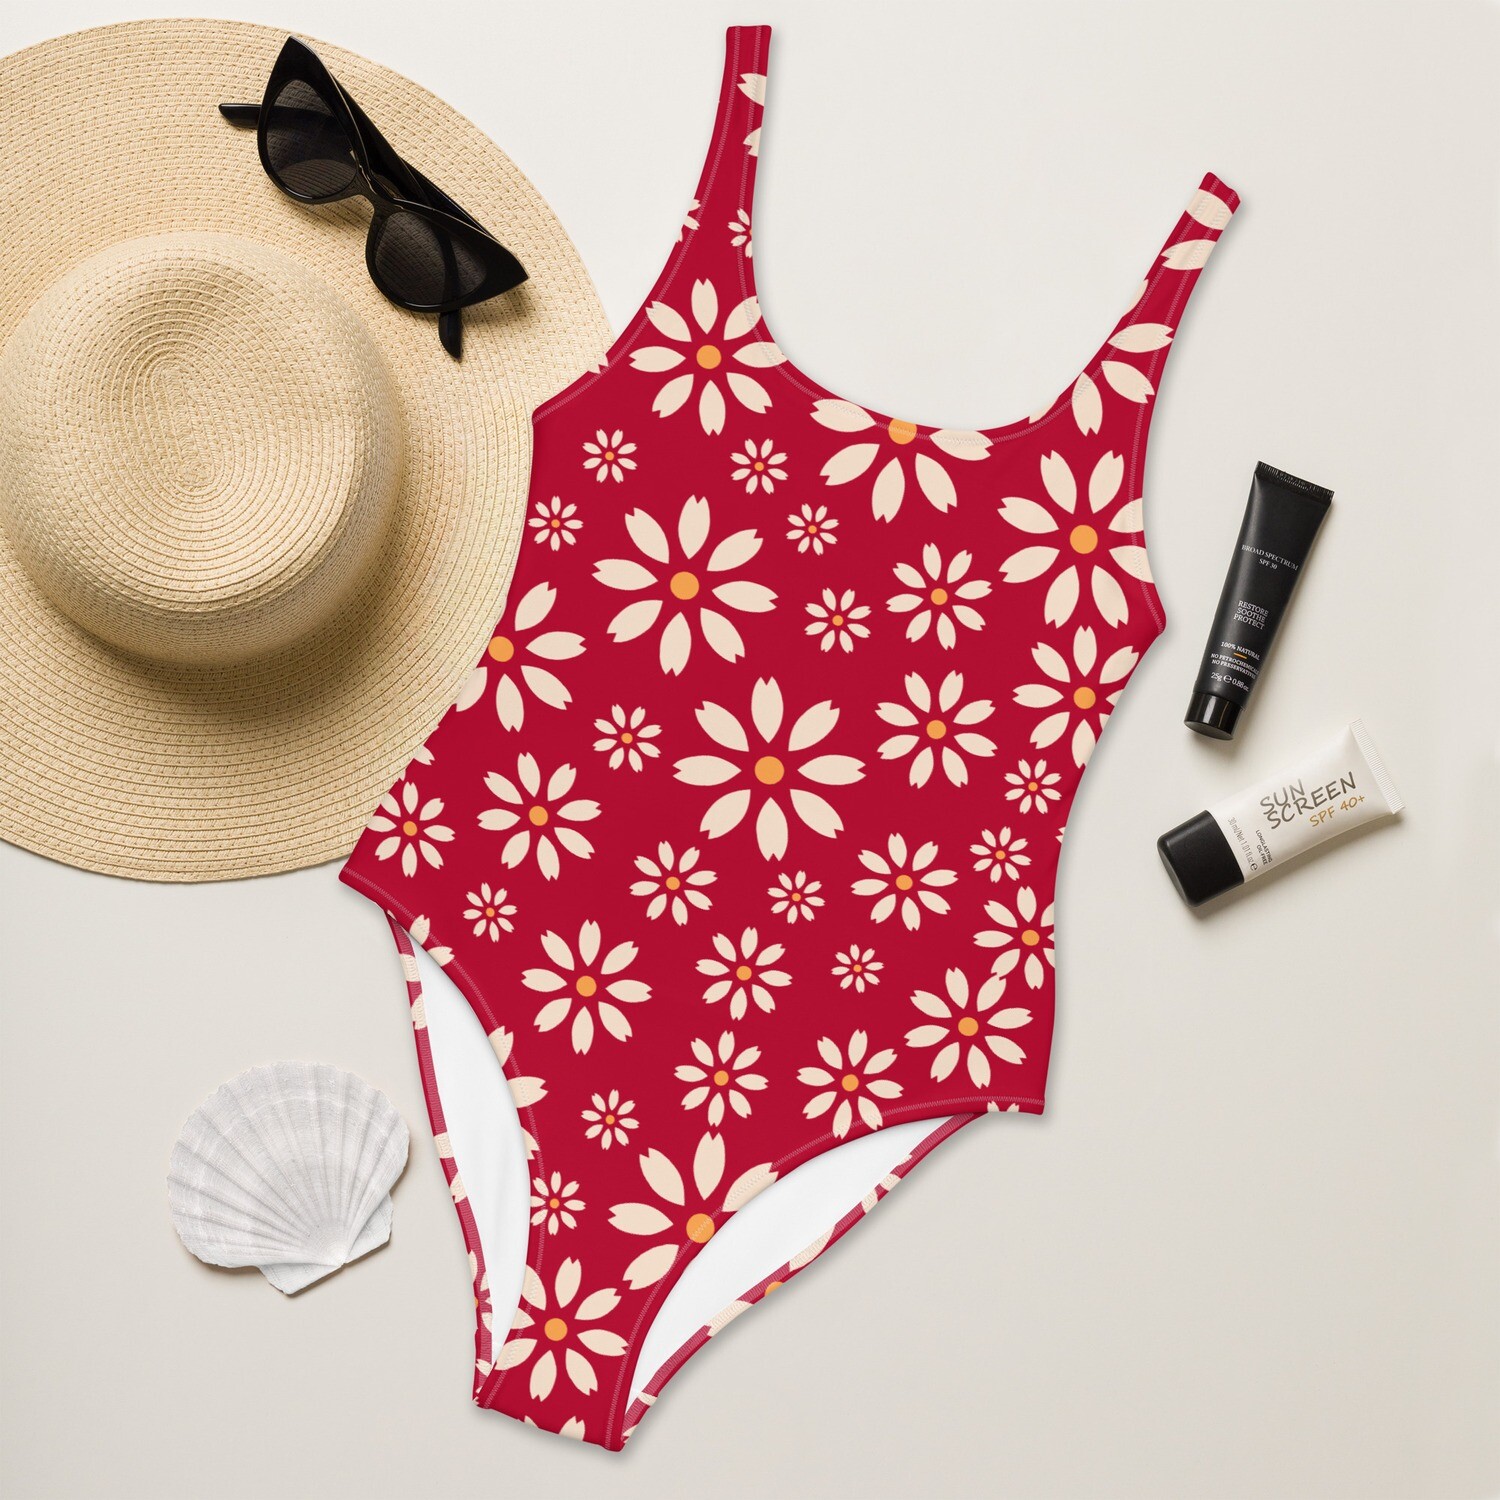 Hibiscus red one-piece swimsuit with retro daisy pattern in sizes XS-3XL